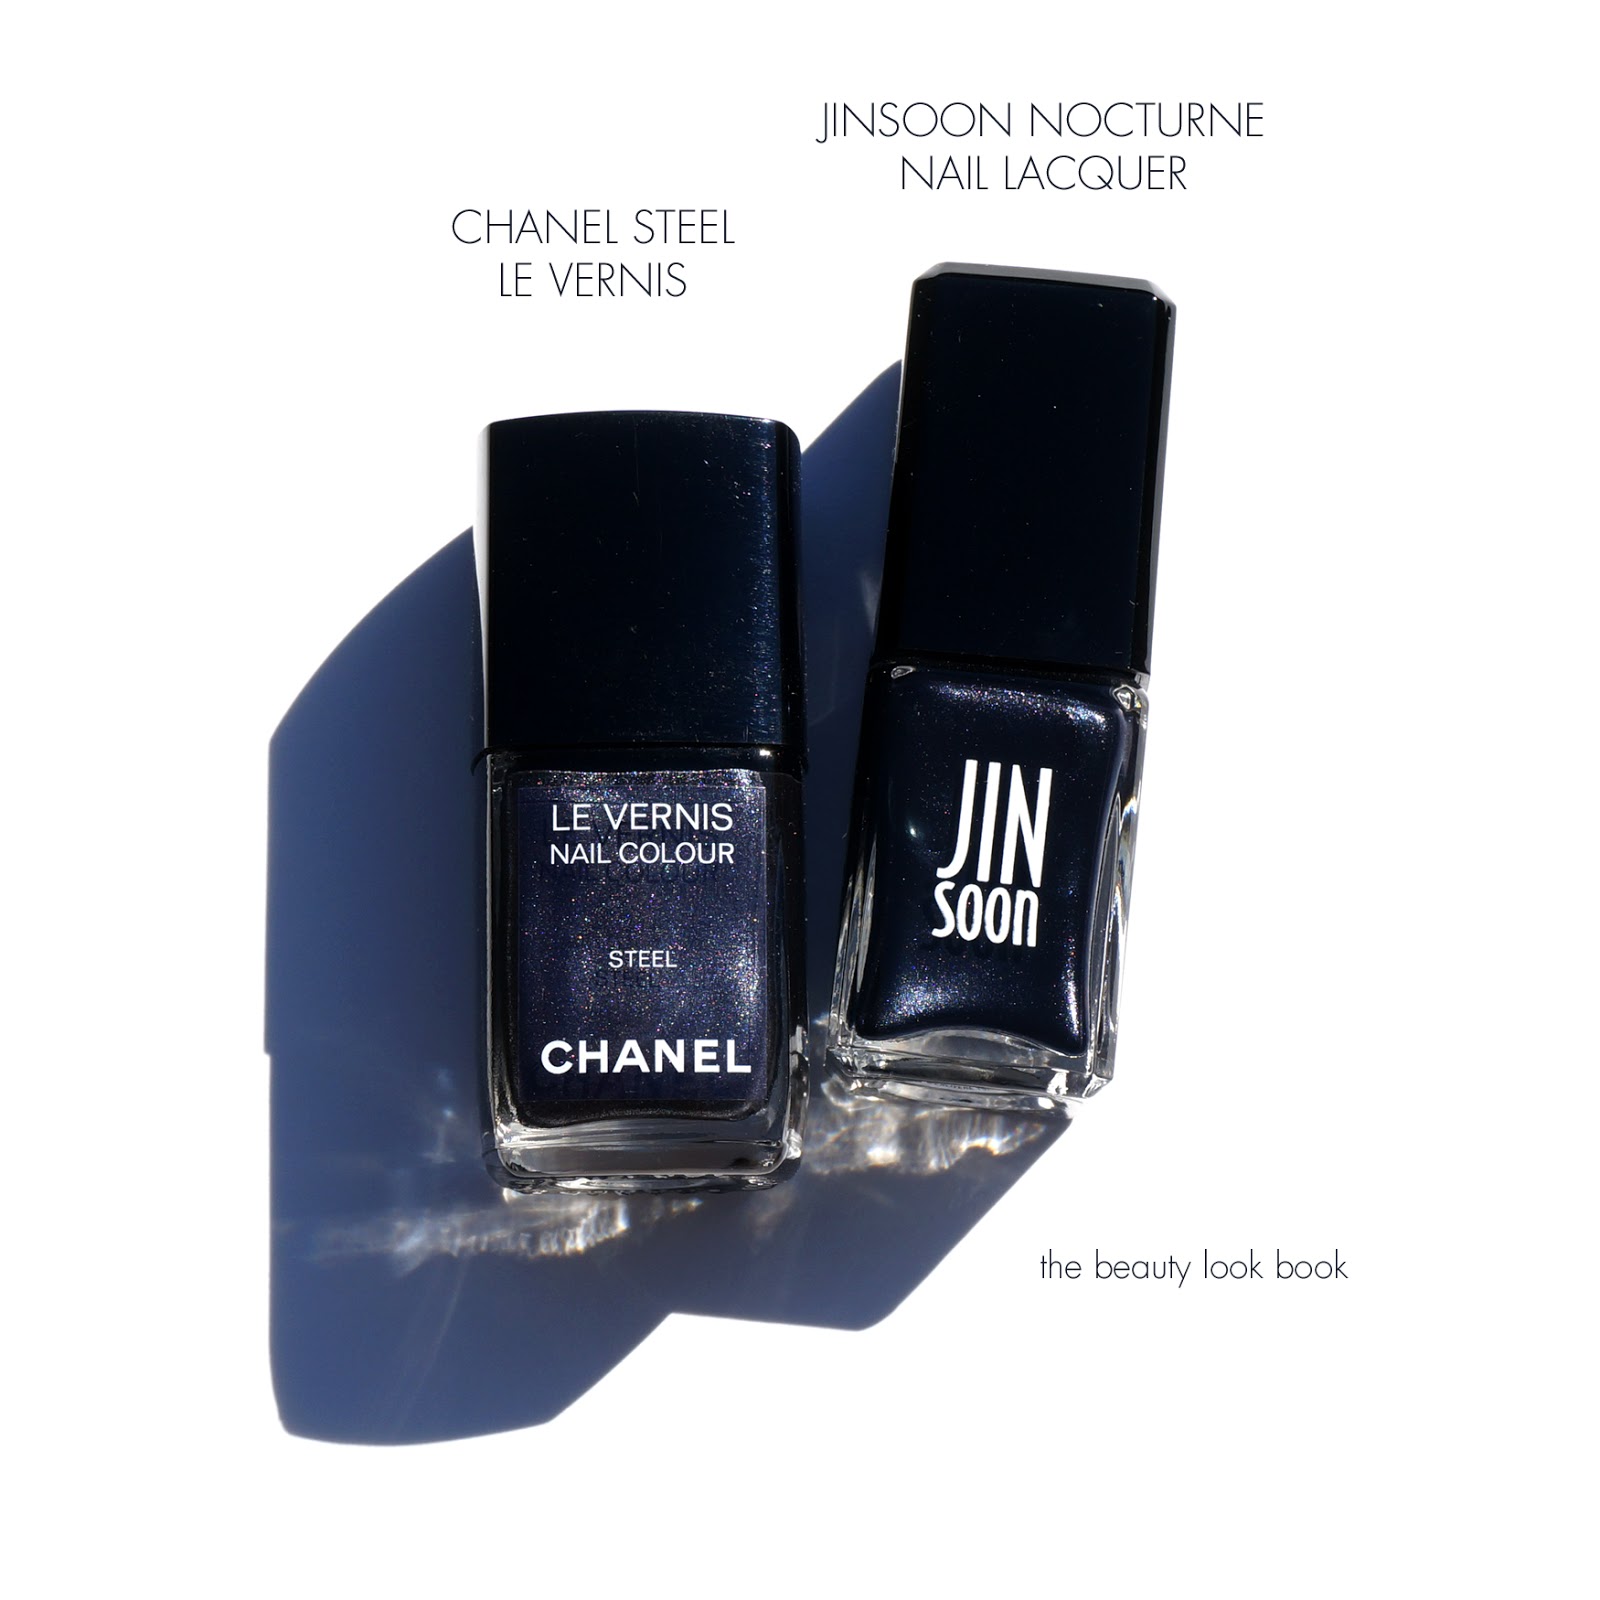 Chanel Magic Le Vernis Nail Colour Review & Swatches